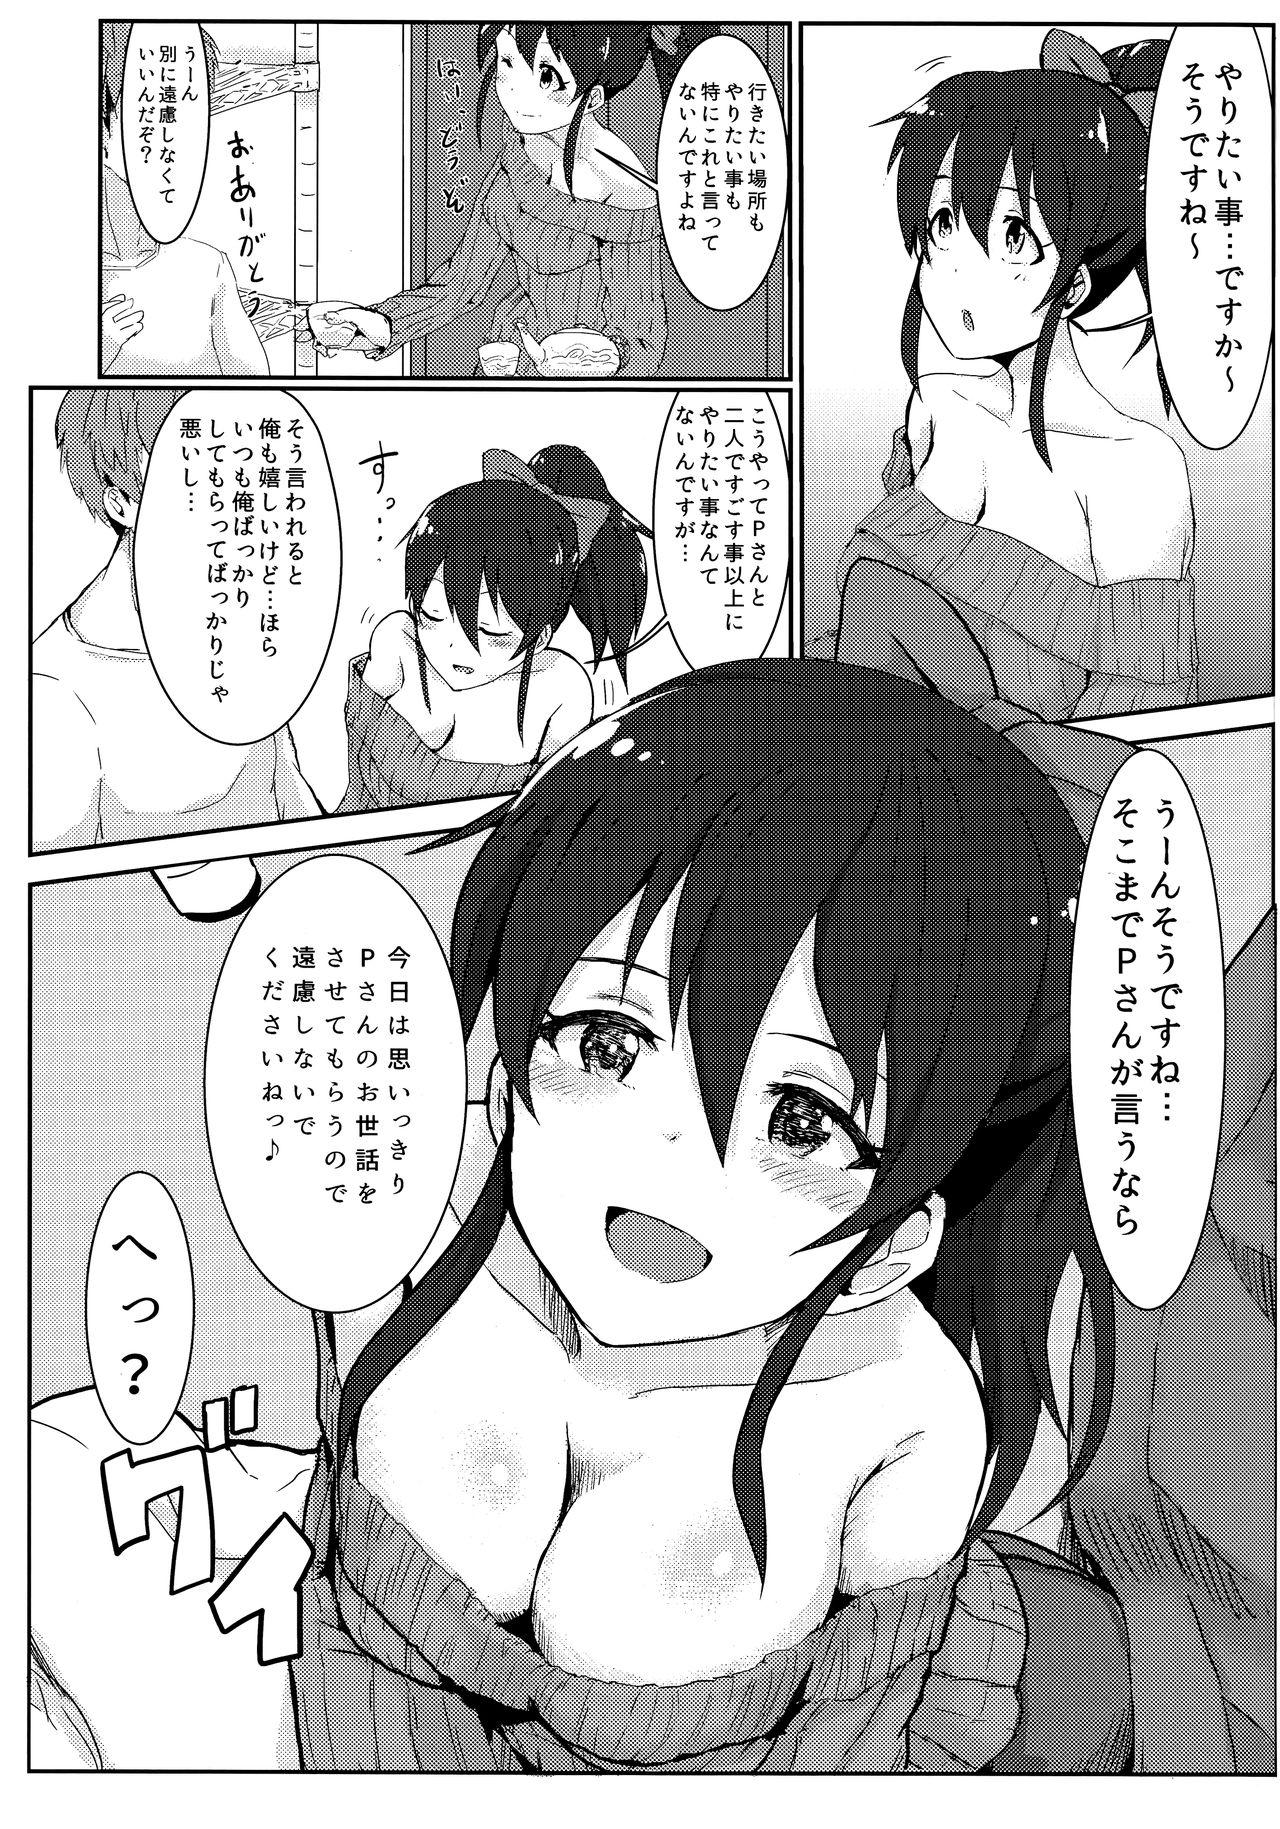 Online Zutto Issho ga Ii na - The idolmaster Missionary Position Porn - Page 6